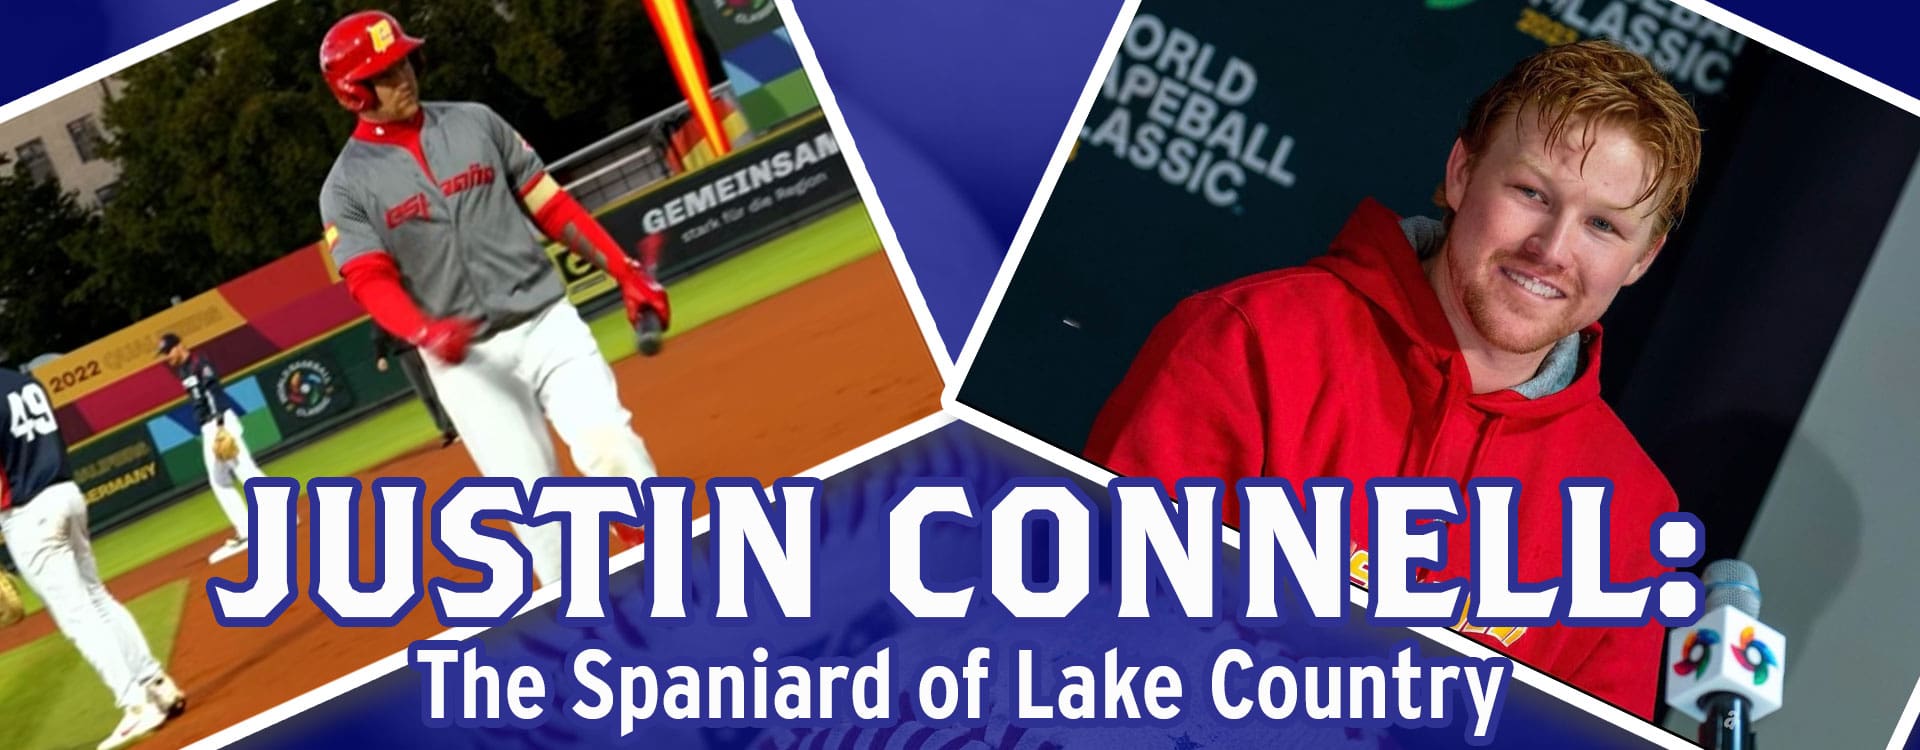 Justin Connel: The Spaniard of Lake Country